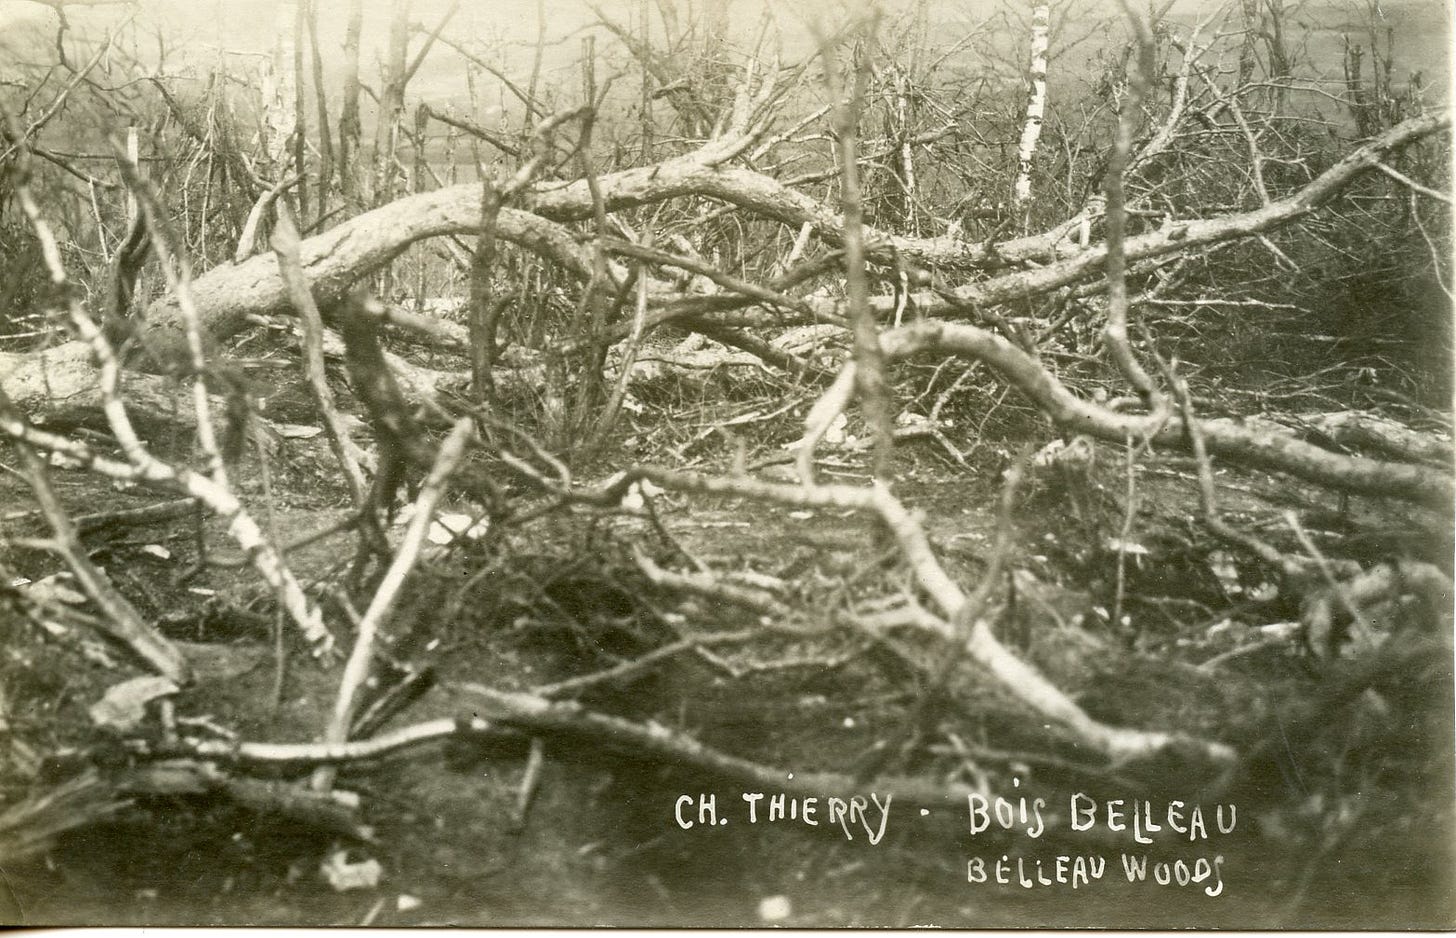 Aftermath of the fighting in Belleau Wood